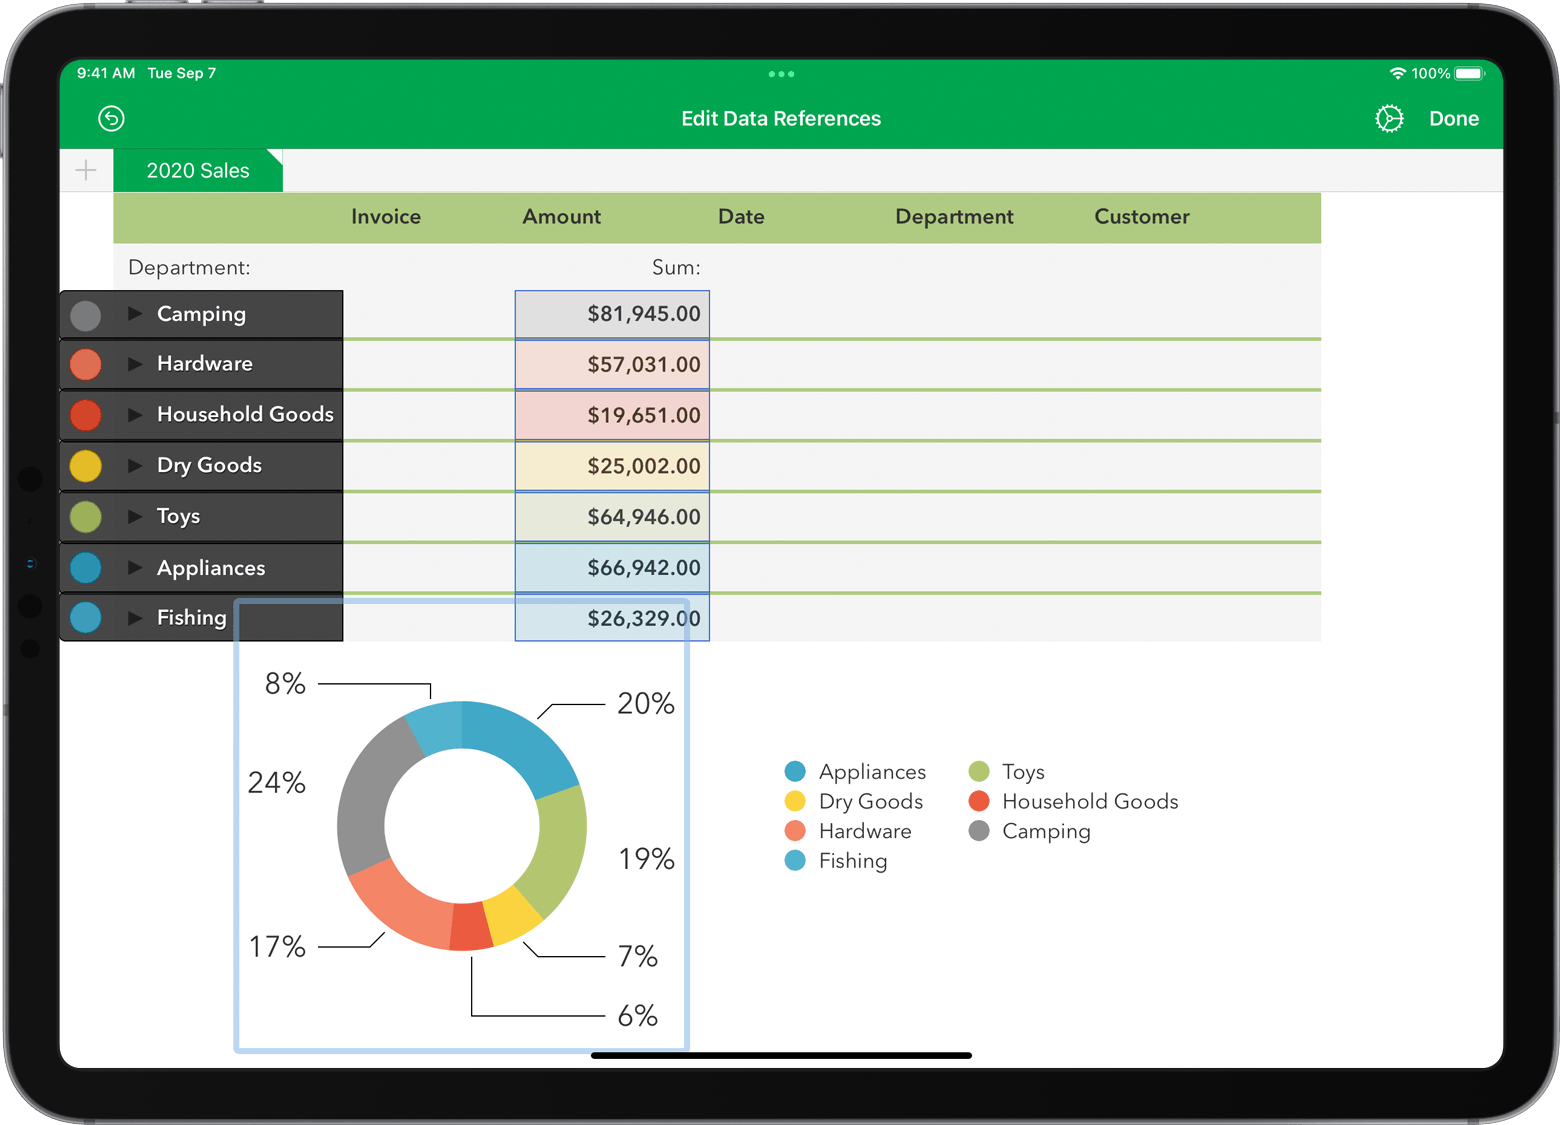 iPad Pro with Numbers spreadsheet showing a donut chart generated from category data in the "Subtotal" column